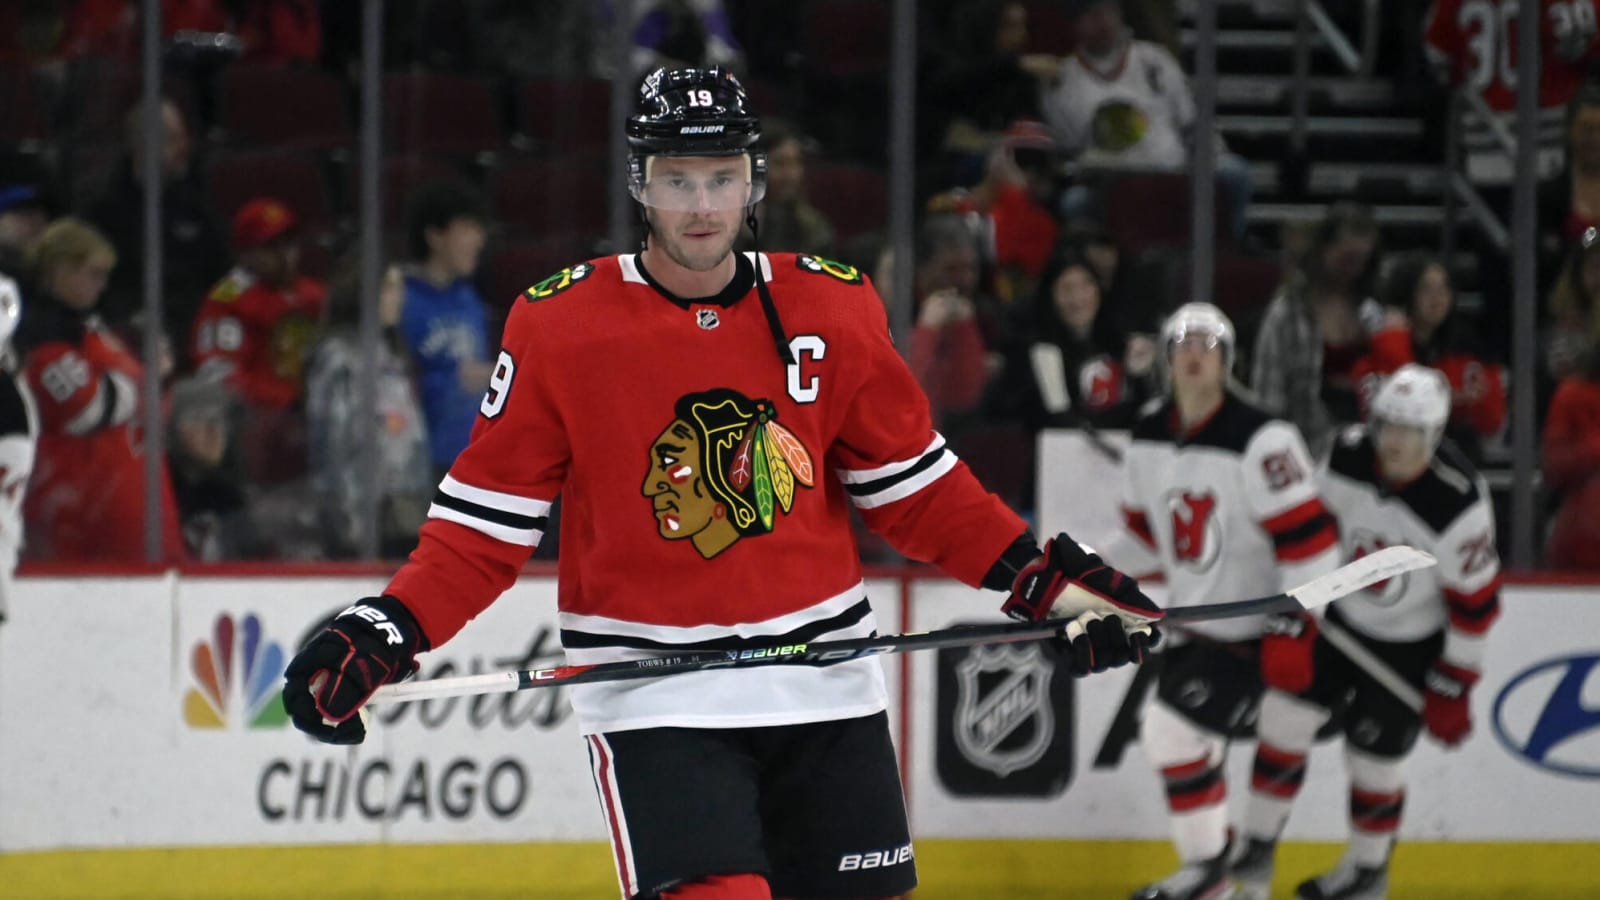 Jonathan Toews Gets Warm Welcome Back, Notches Assist in Return Game